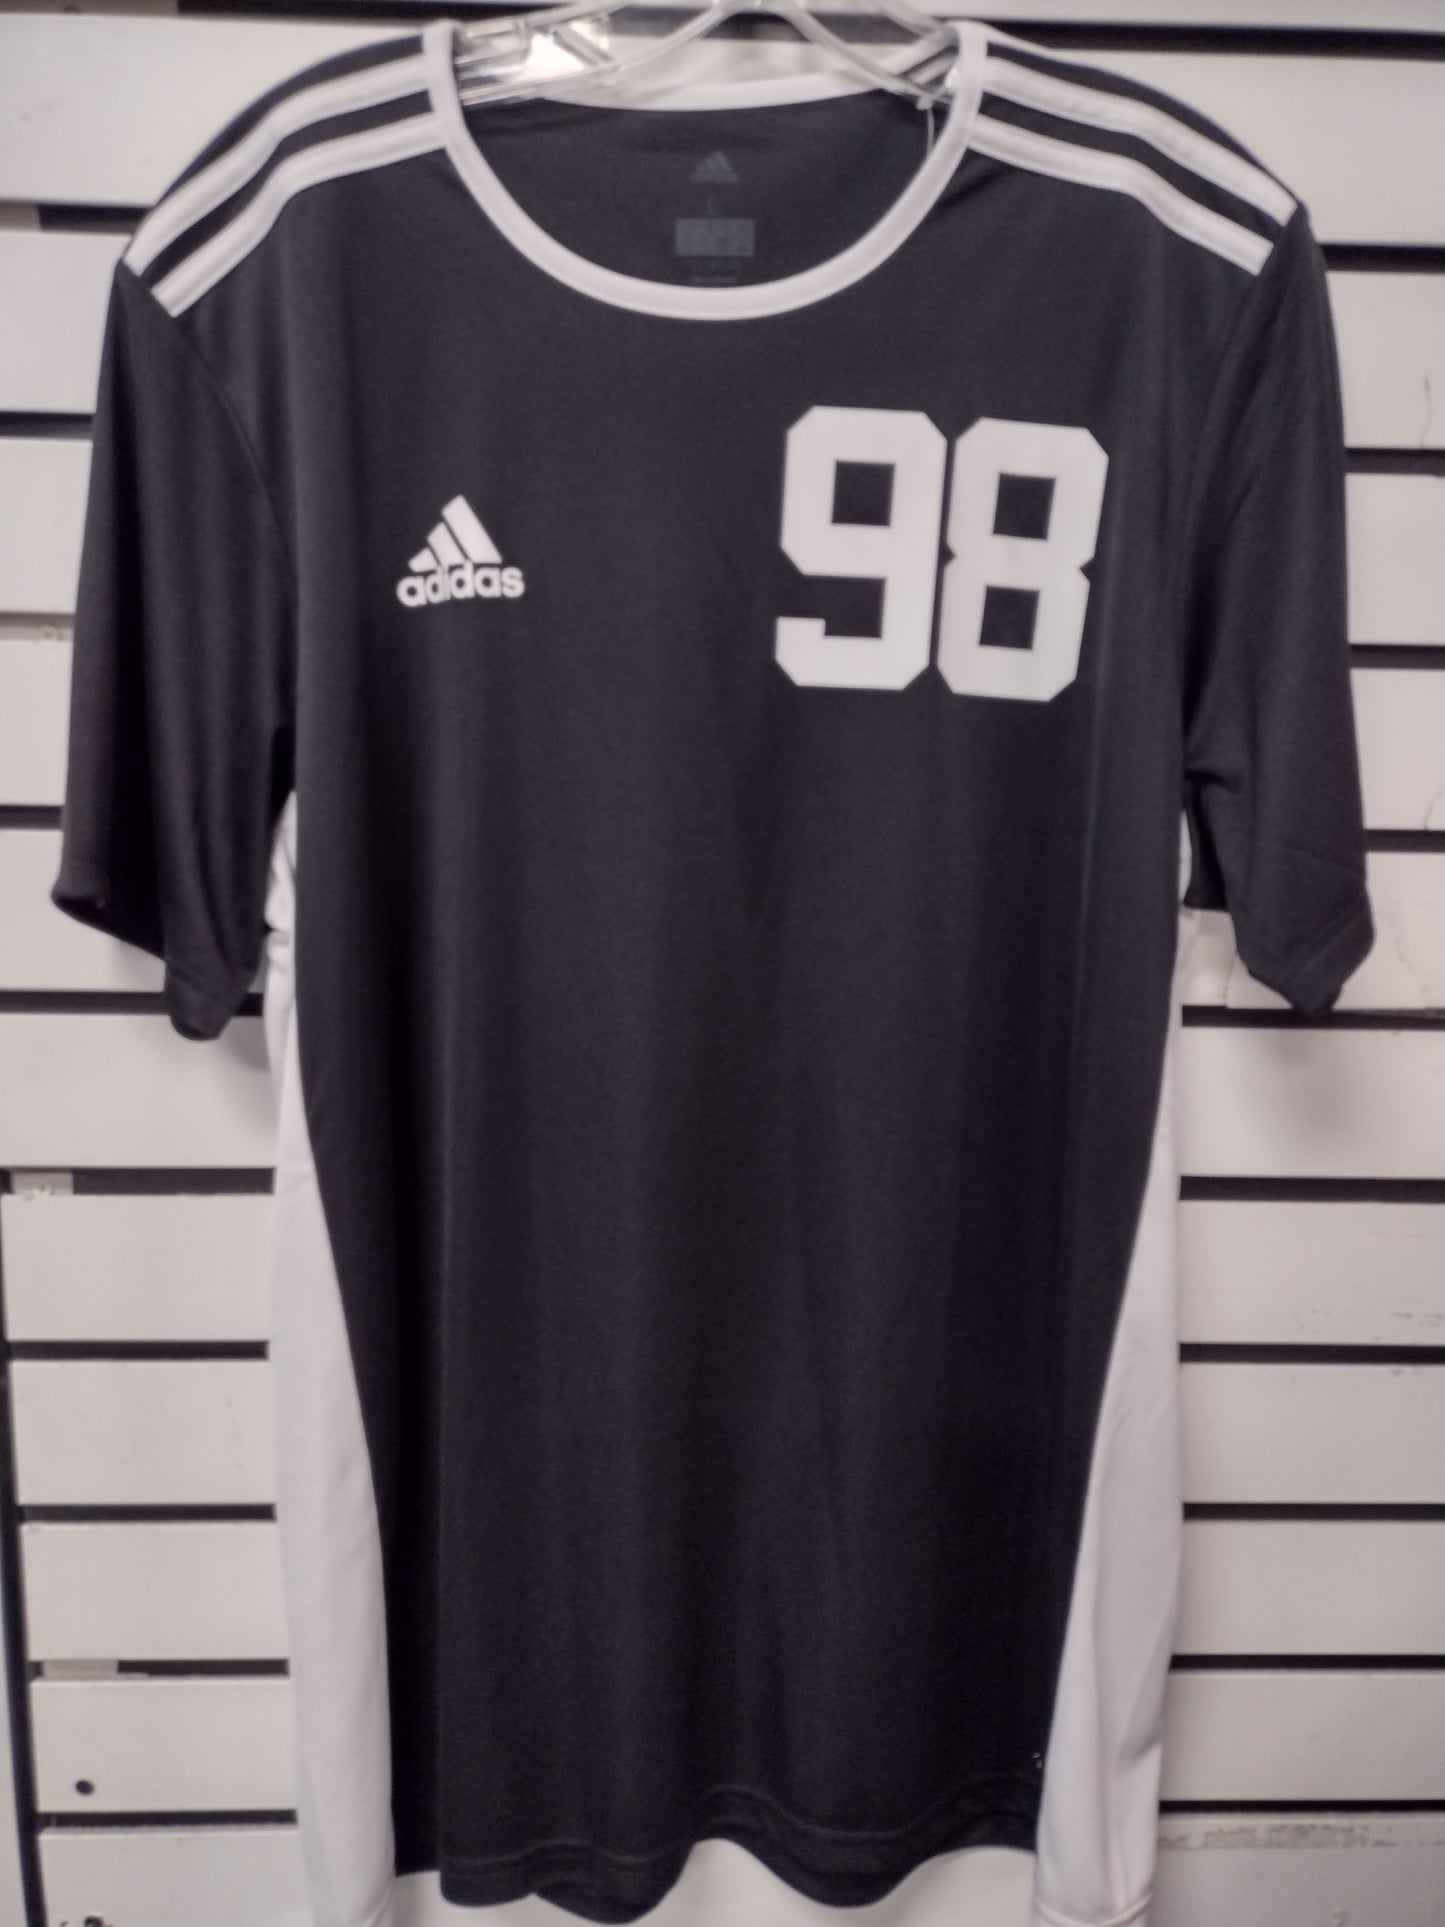 adidas Avail Over The James 98 Jersey Men's Large "Avail 98" on back